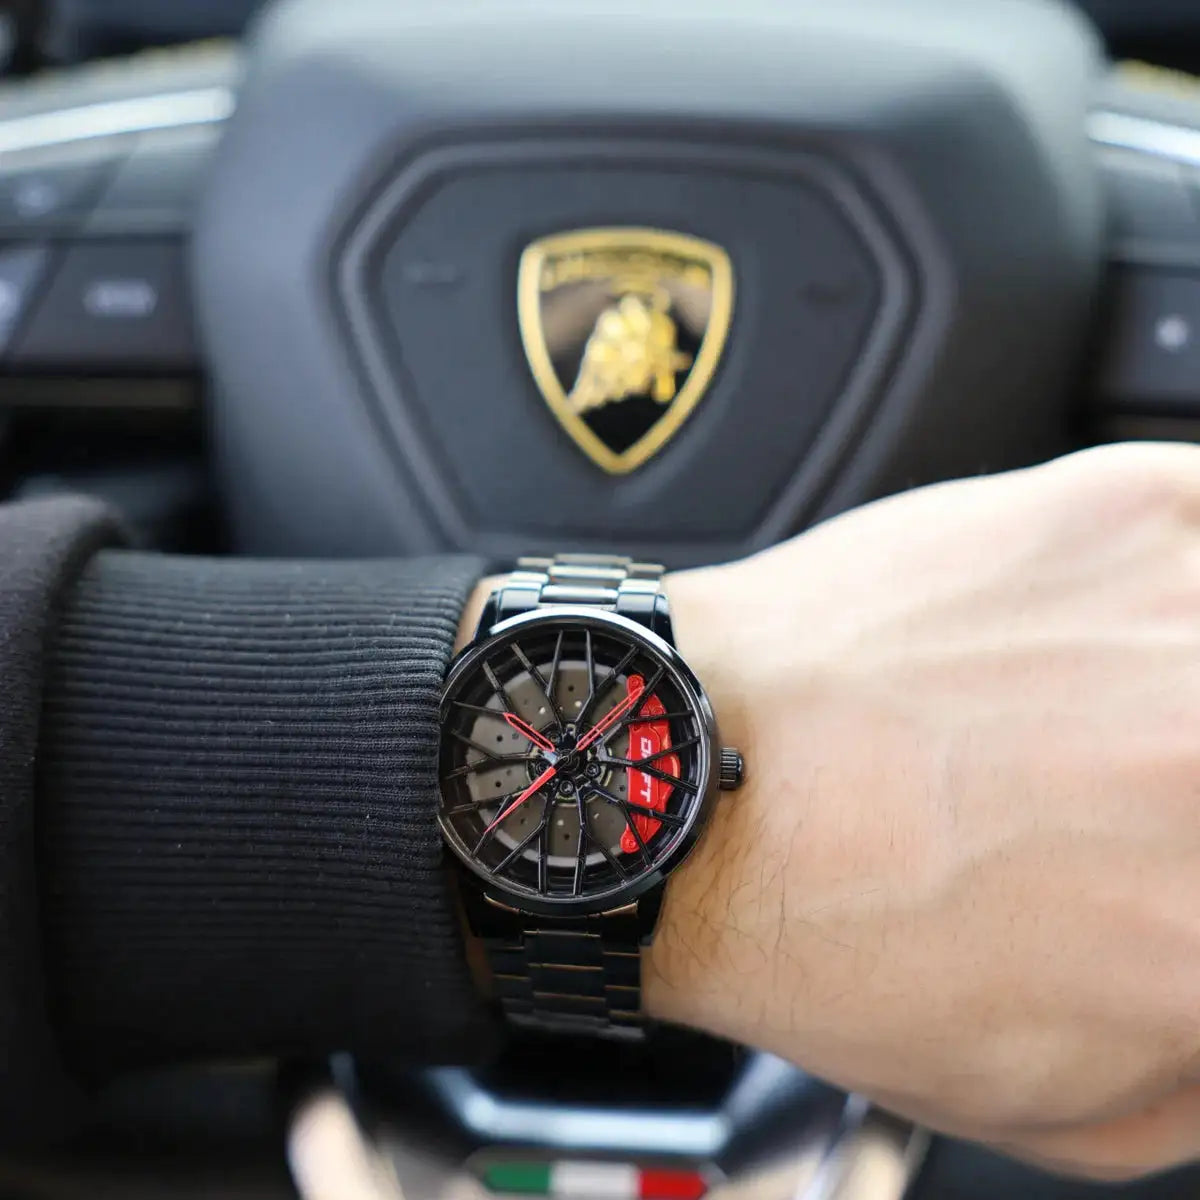 Black motorsports watch with red accents on wrist against a racing backdrop.